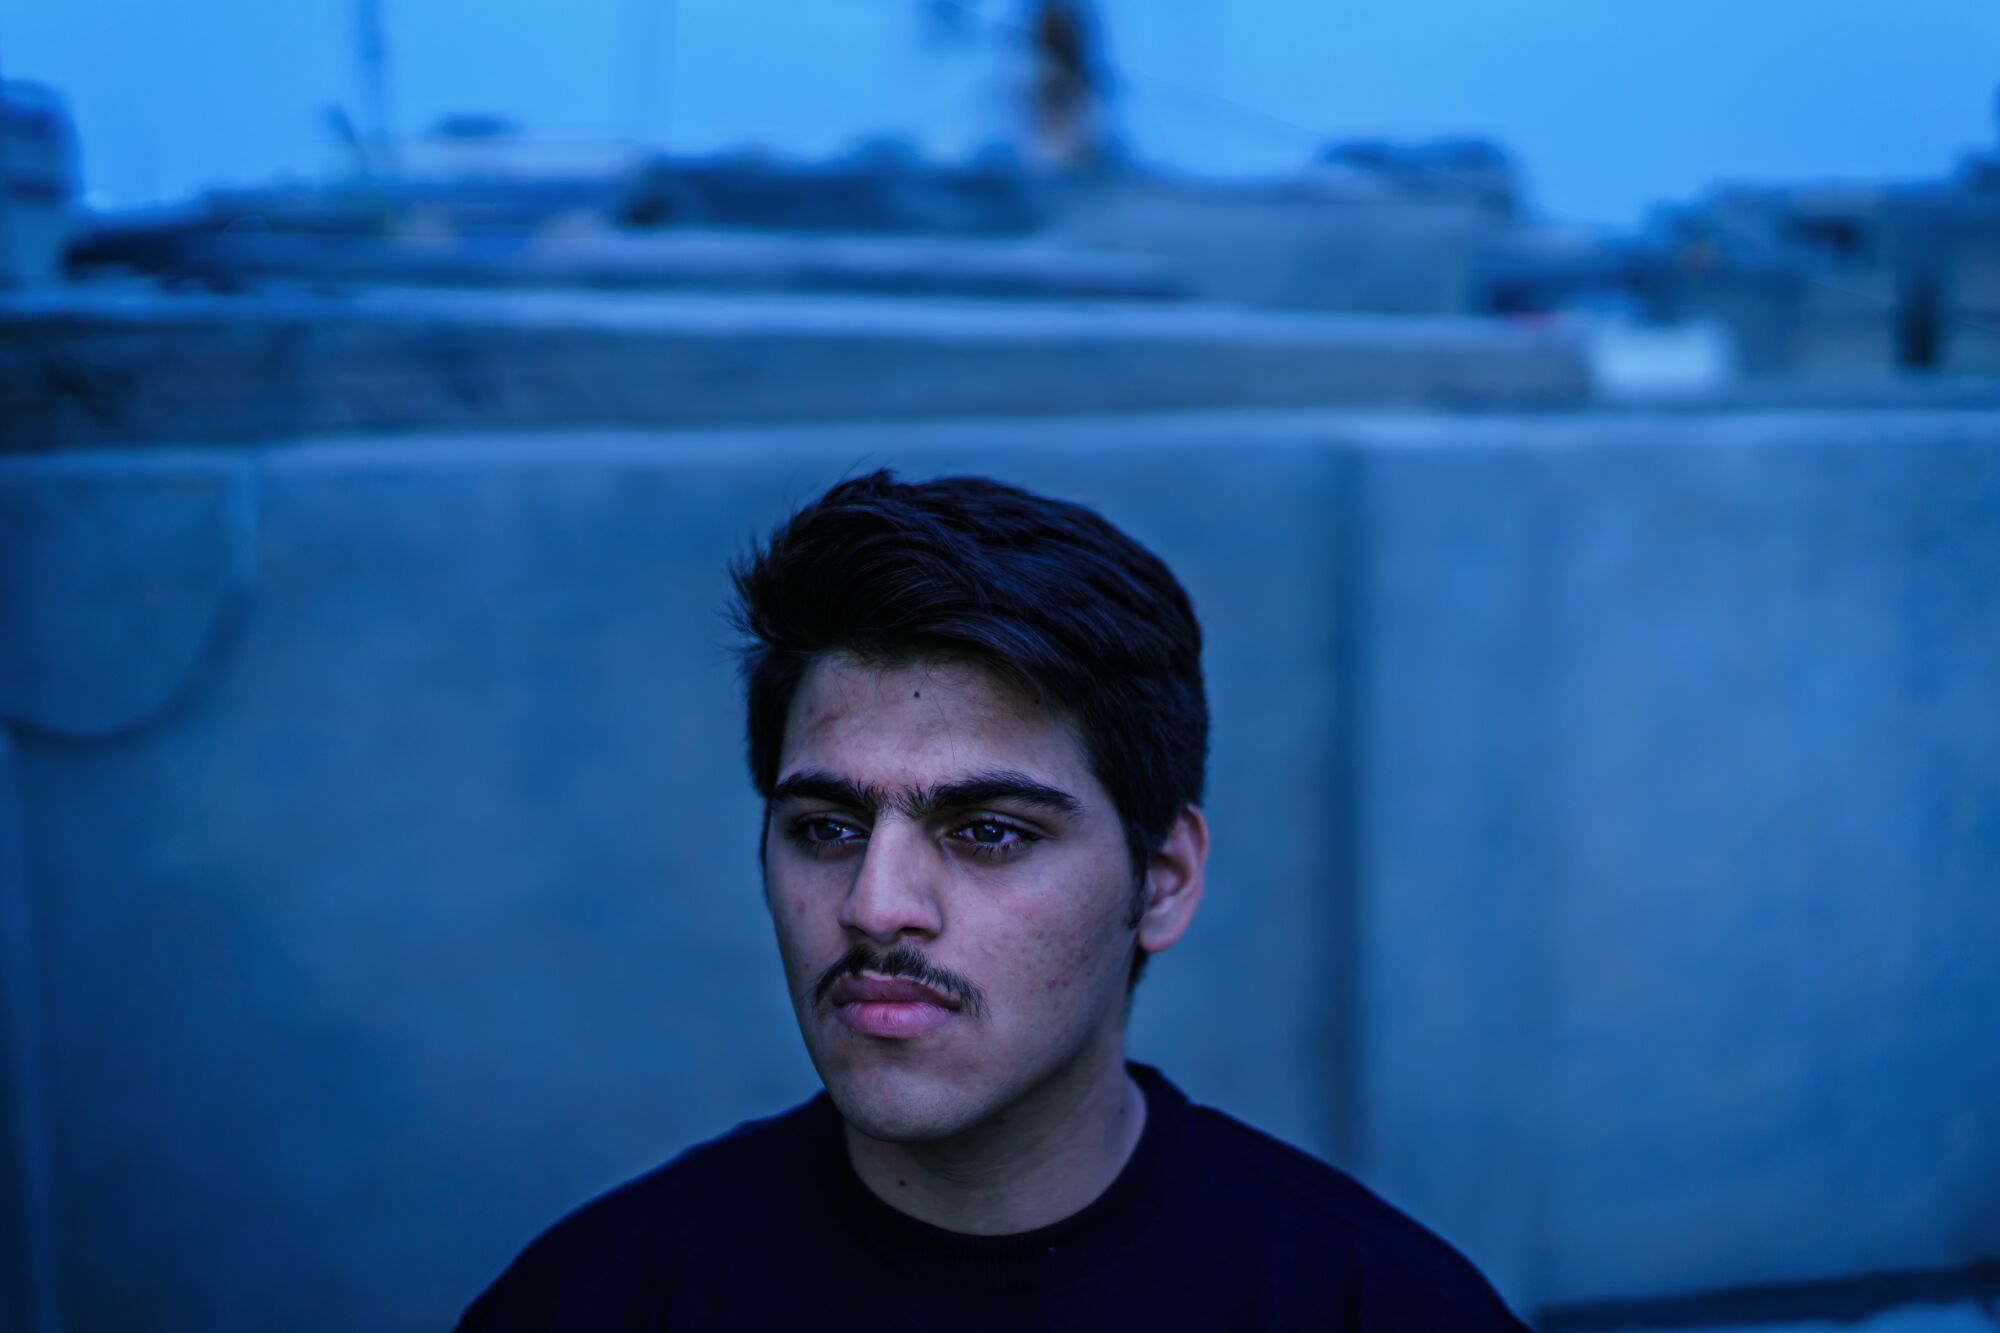 A pensive-looking young man with dark hair and mustache 